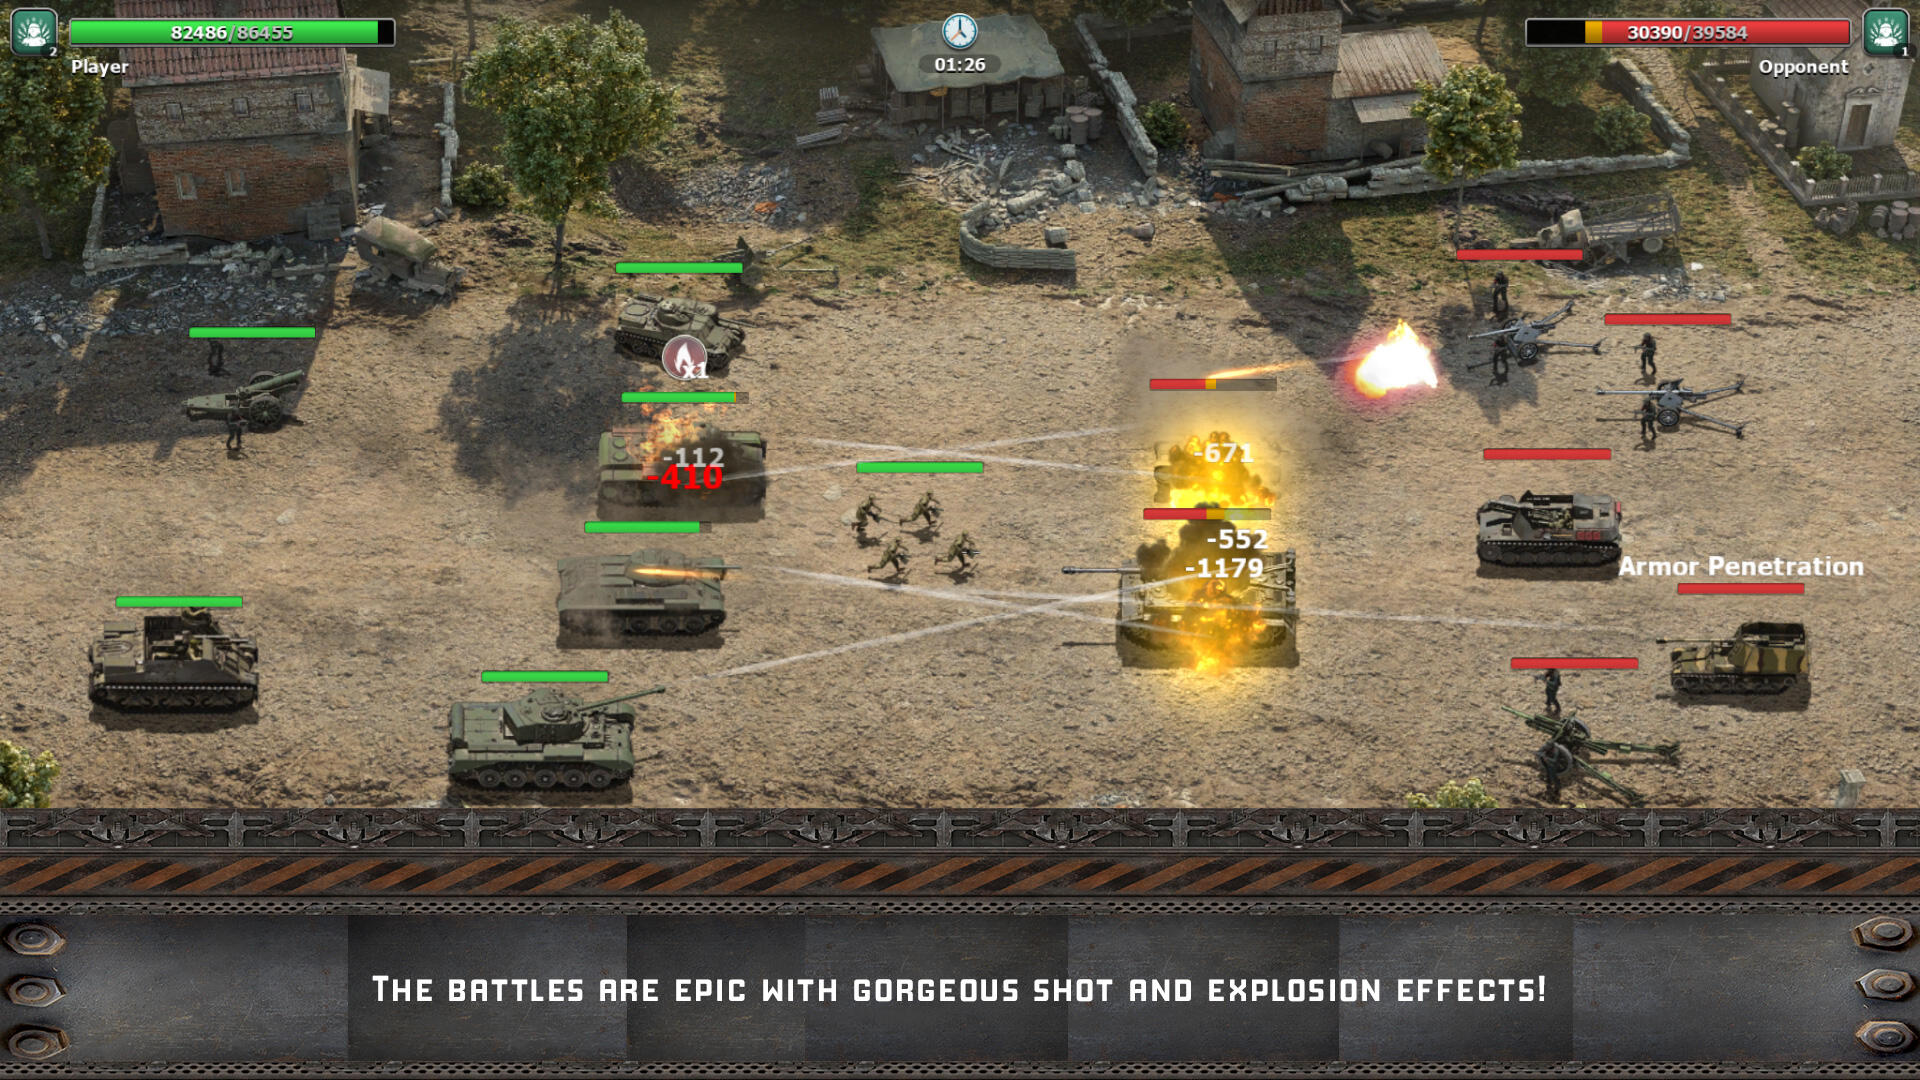 Play War Heroes game online (Level 01-03) - Y8 Game